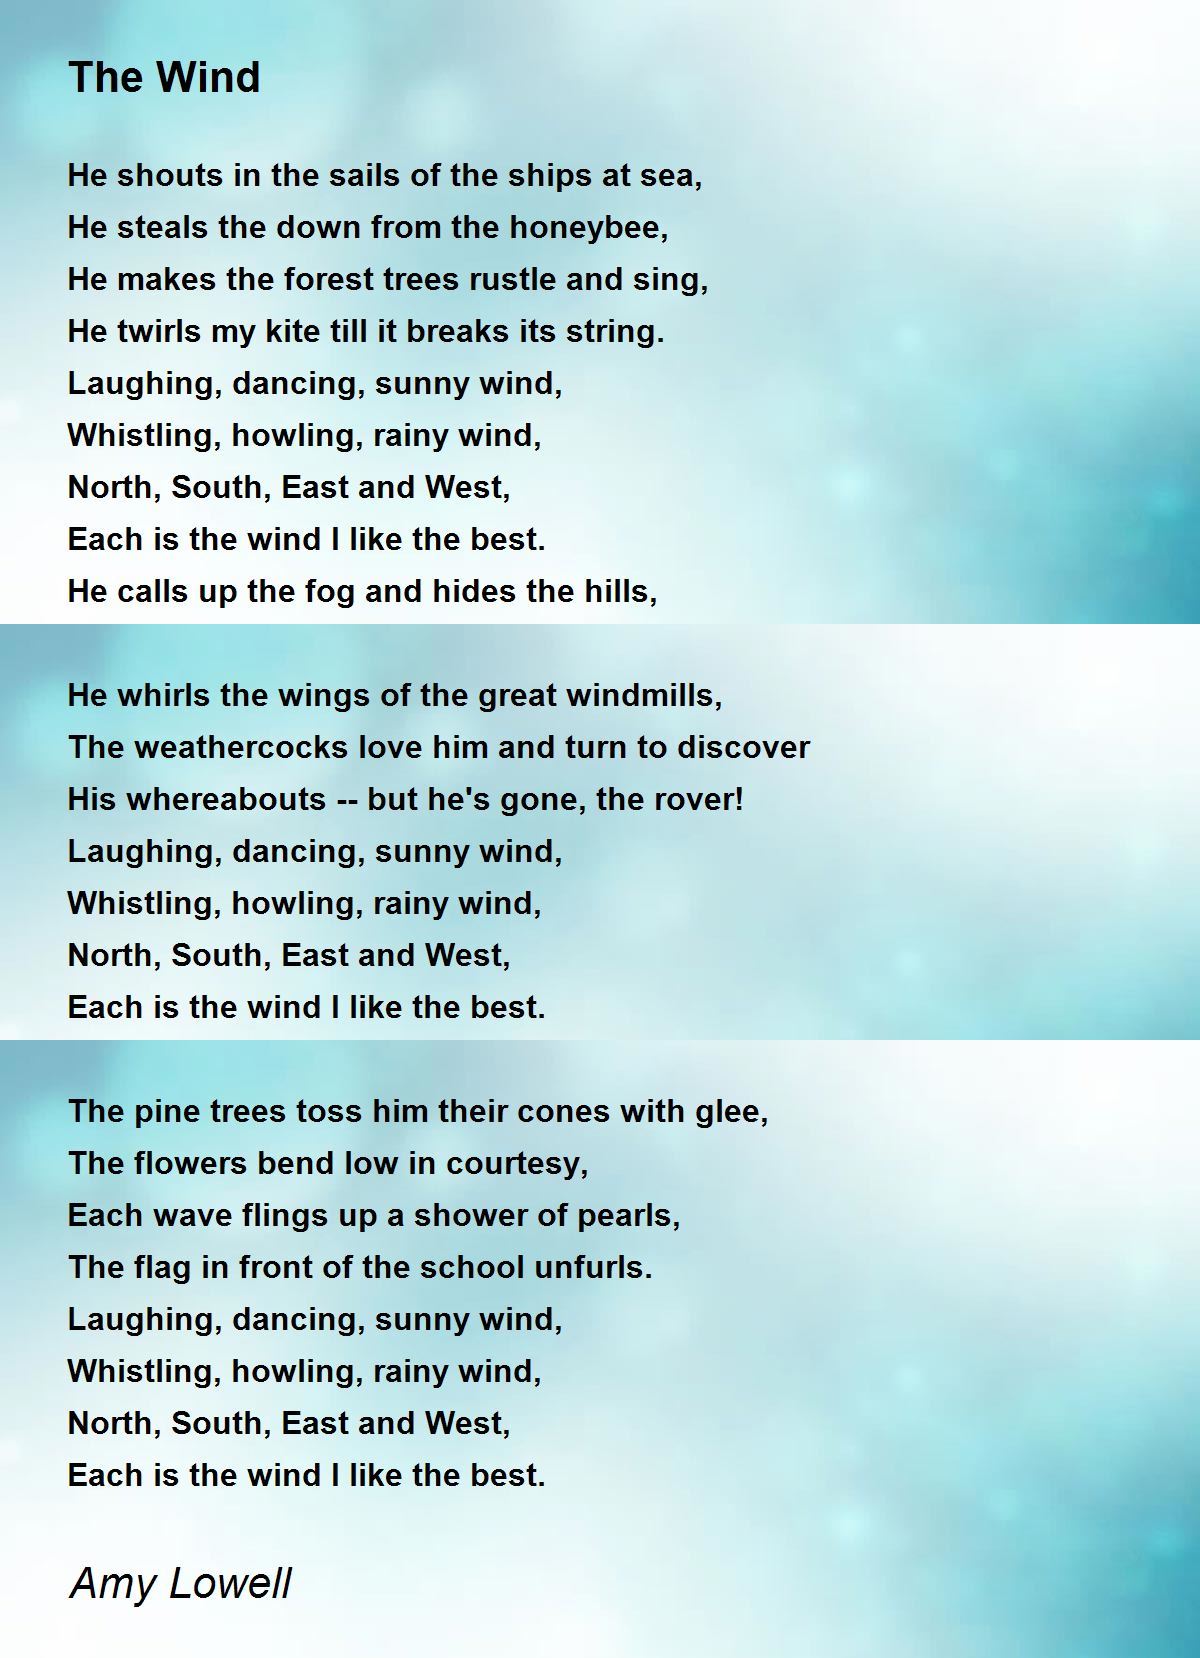 The Wind Poem by Amy Lowell - Poem Hunter